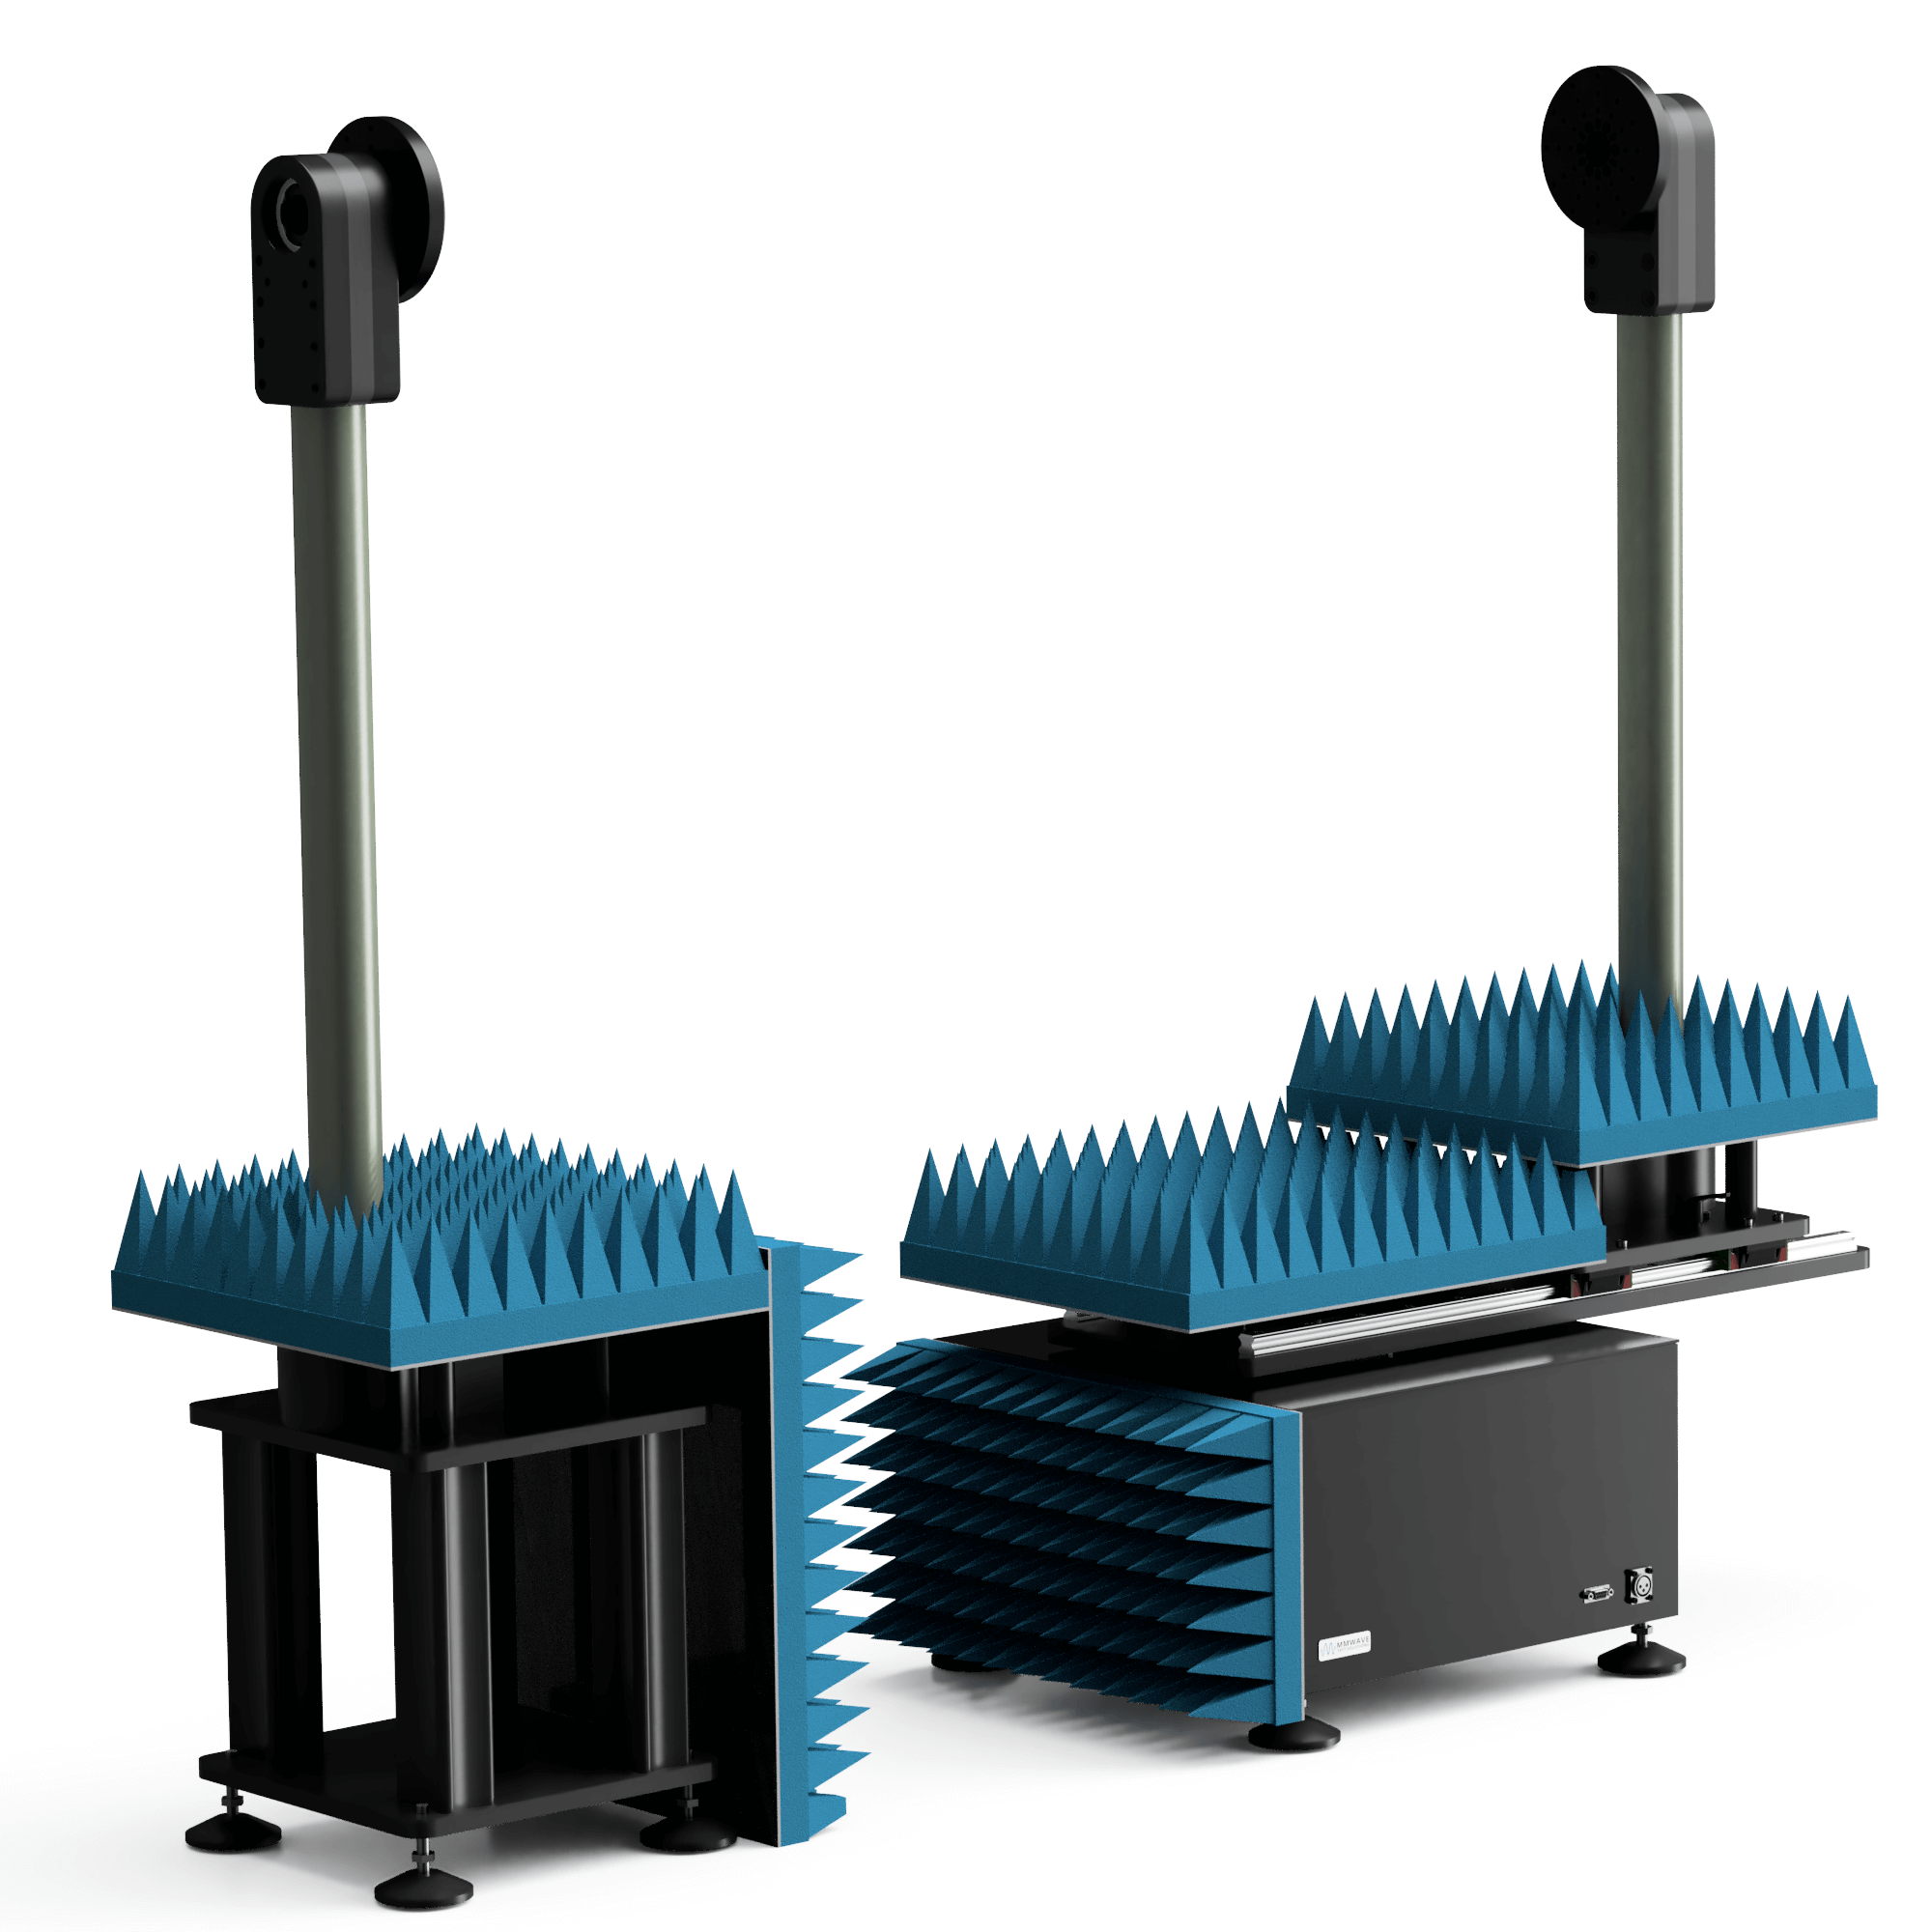 DUO positioners from mmWaveTest